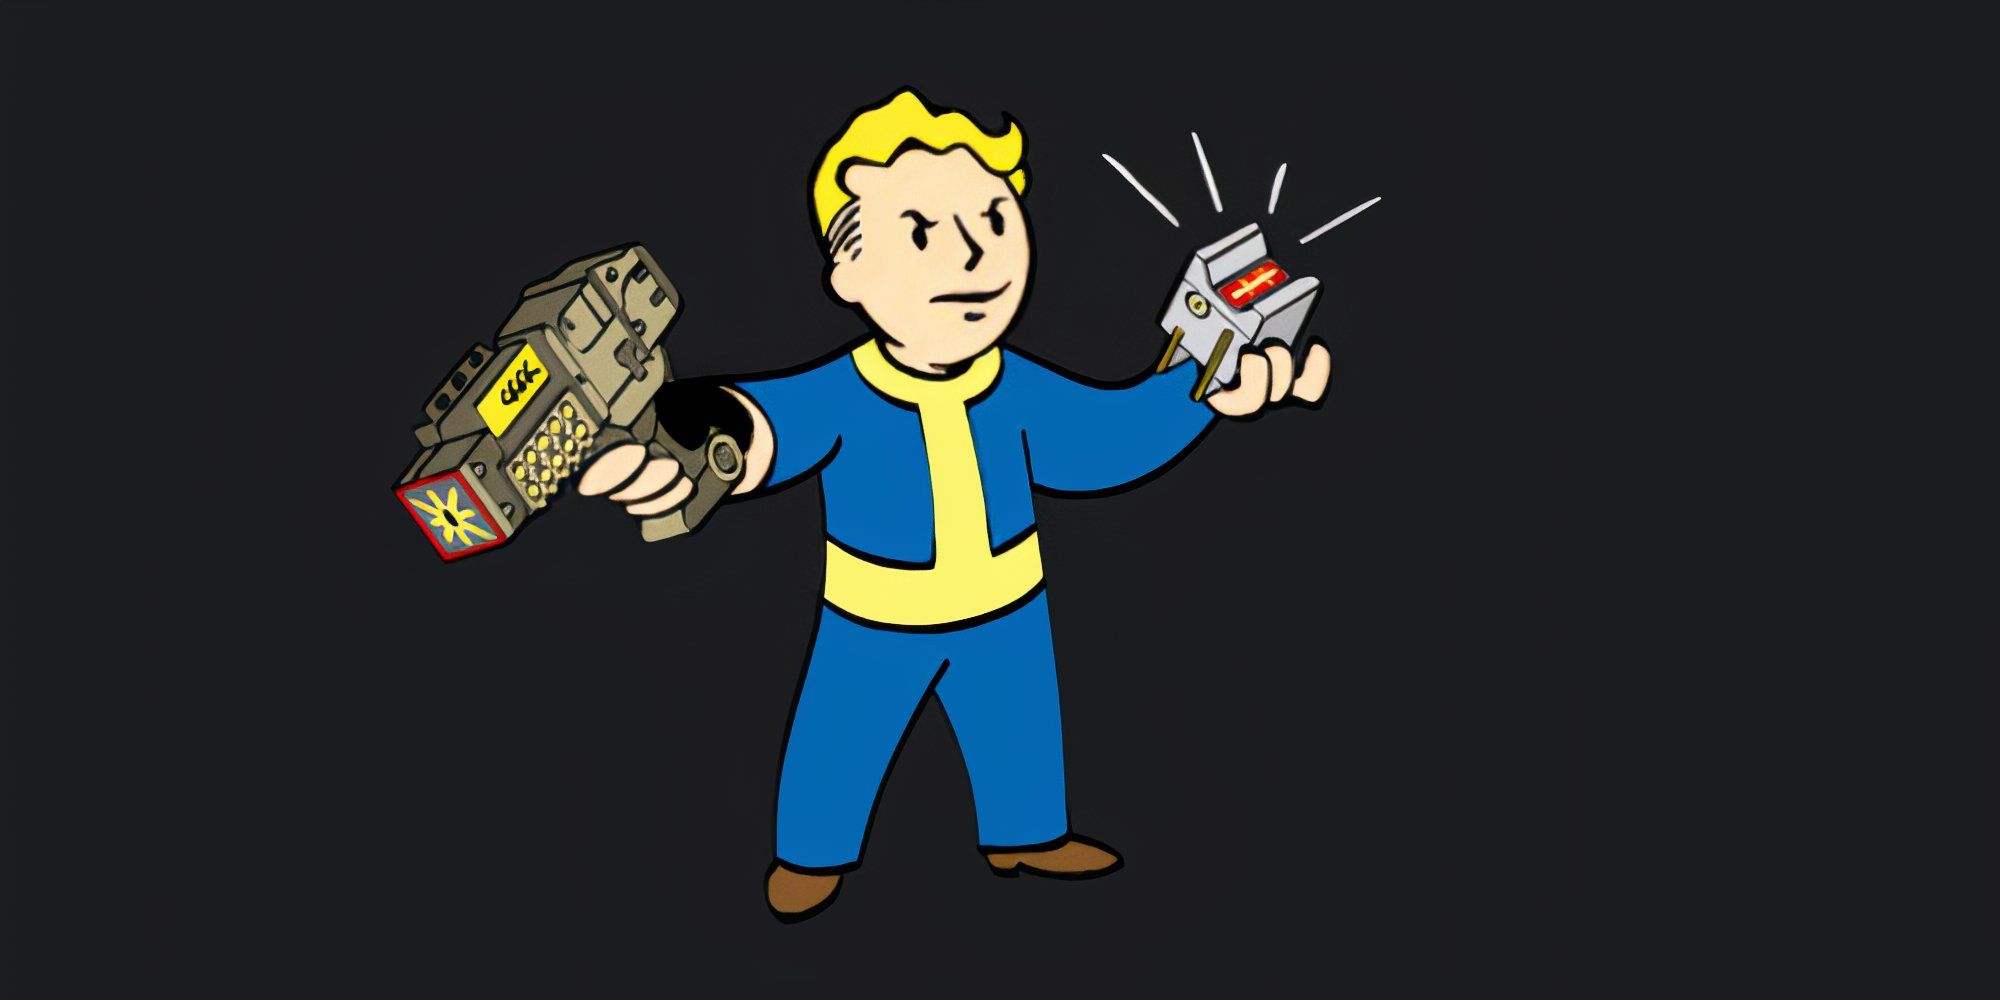 Vault Boy holds an energy weapon and mod in his hands